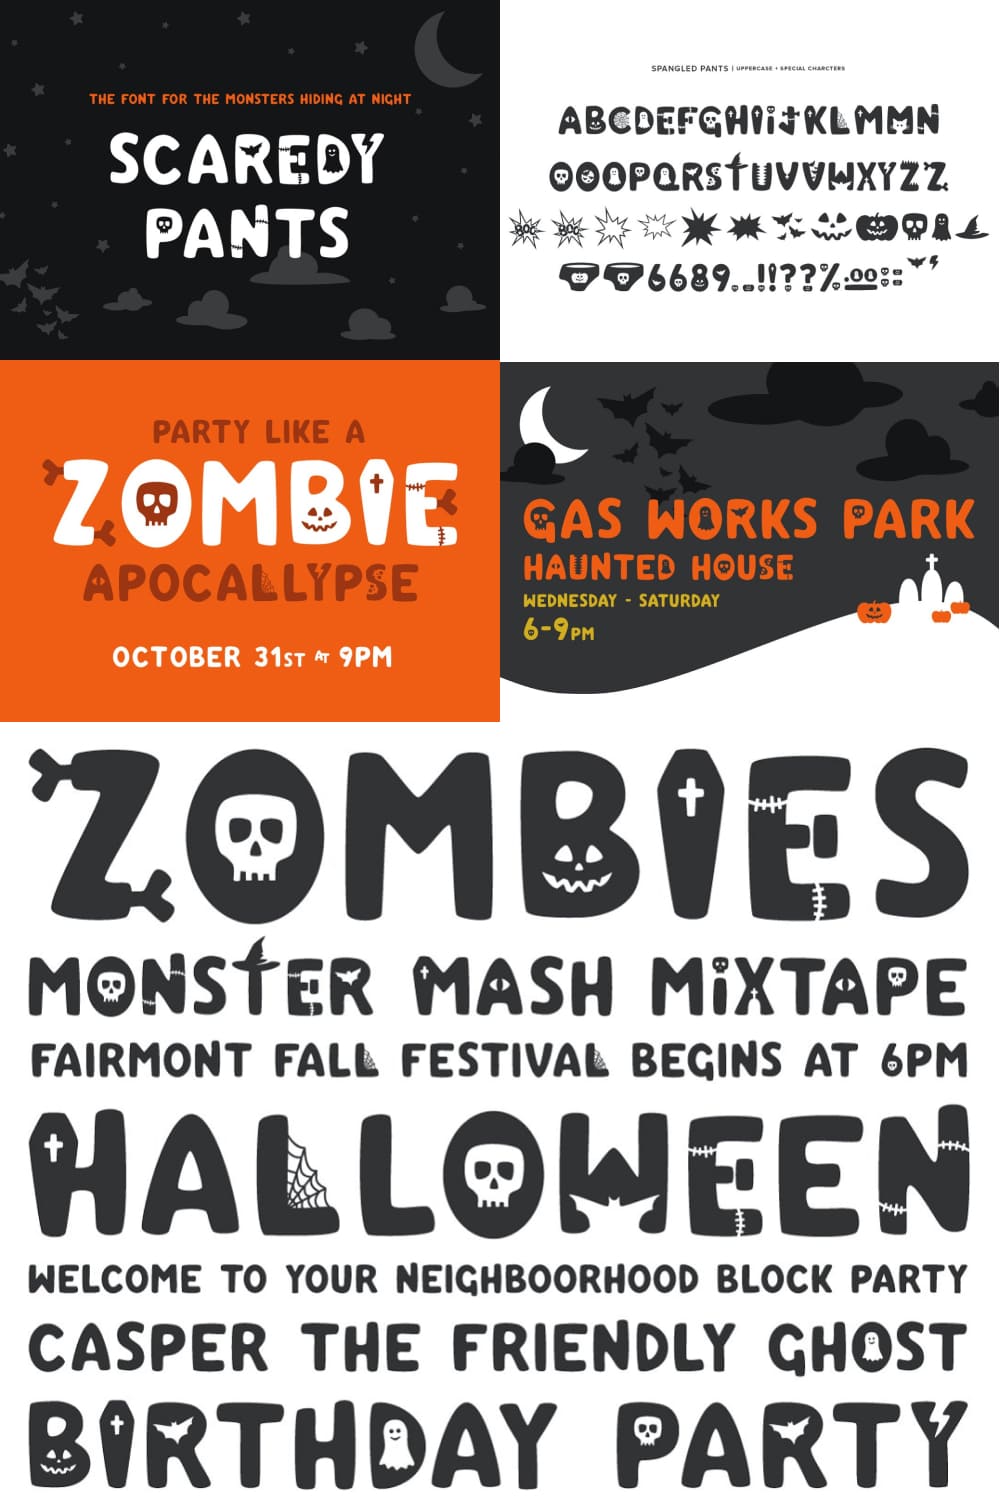 Great Halloween themed font.